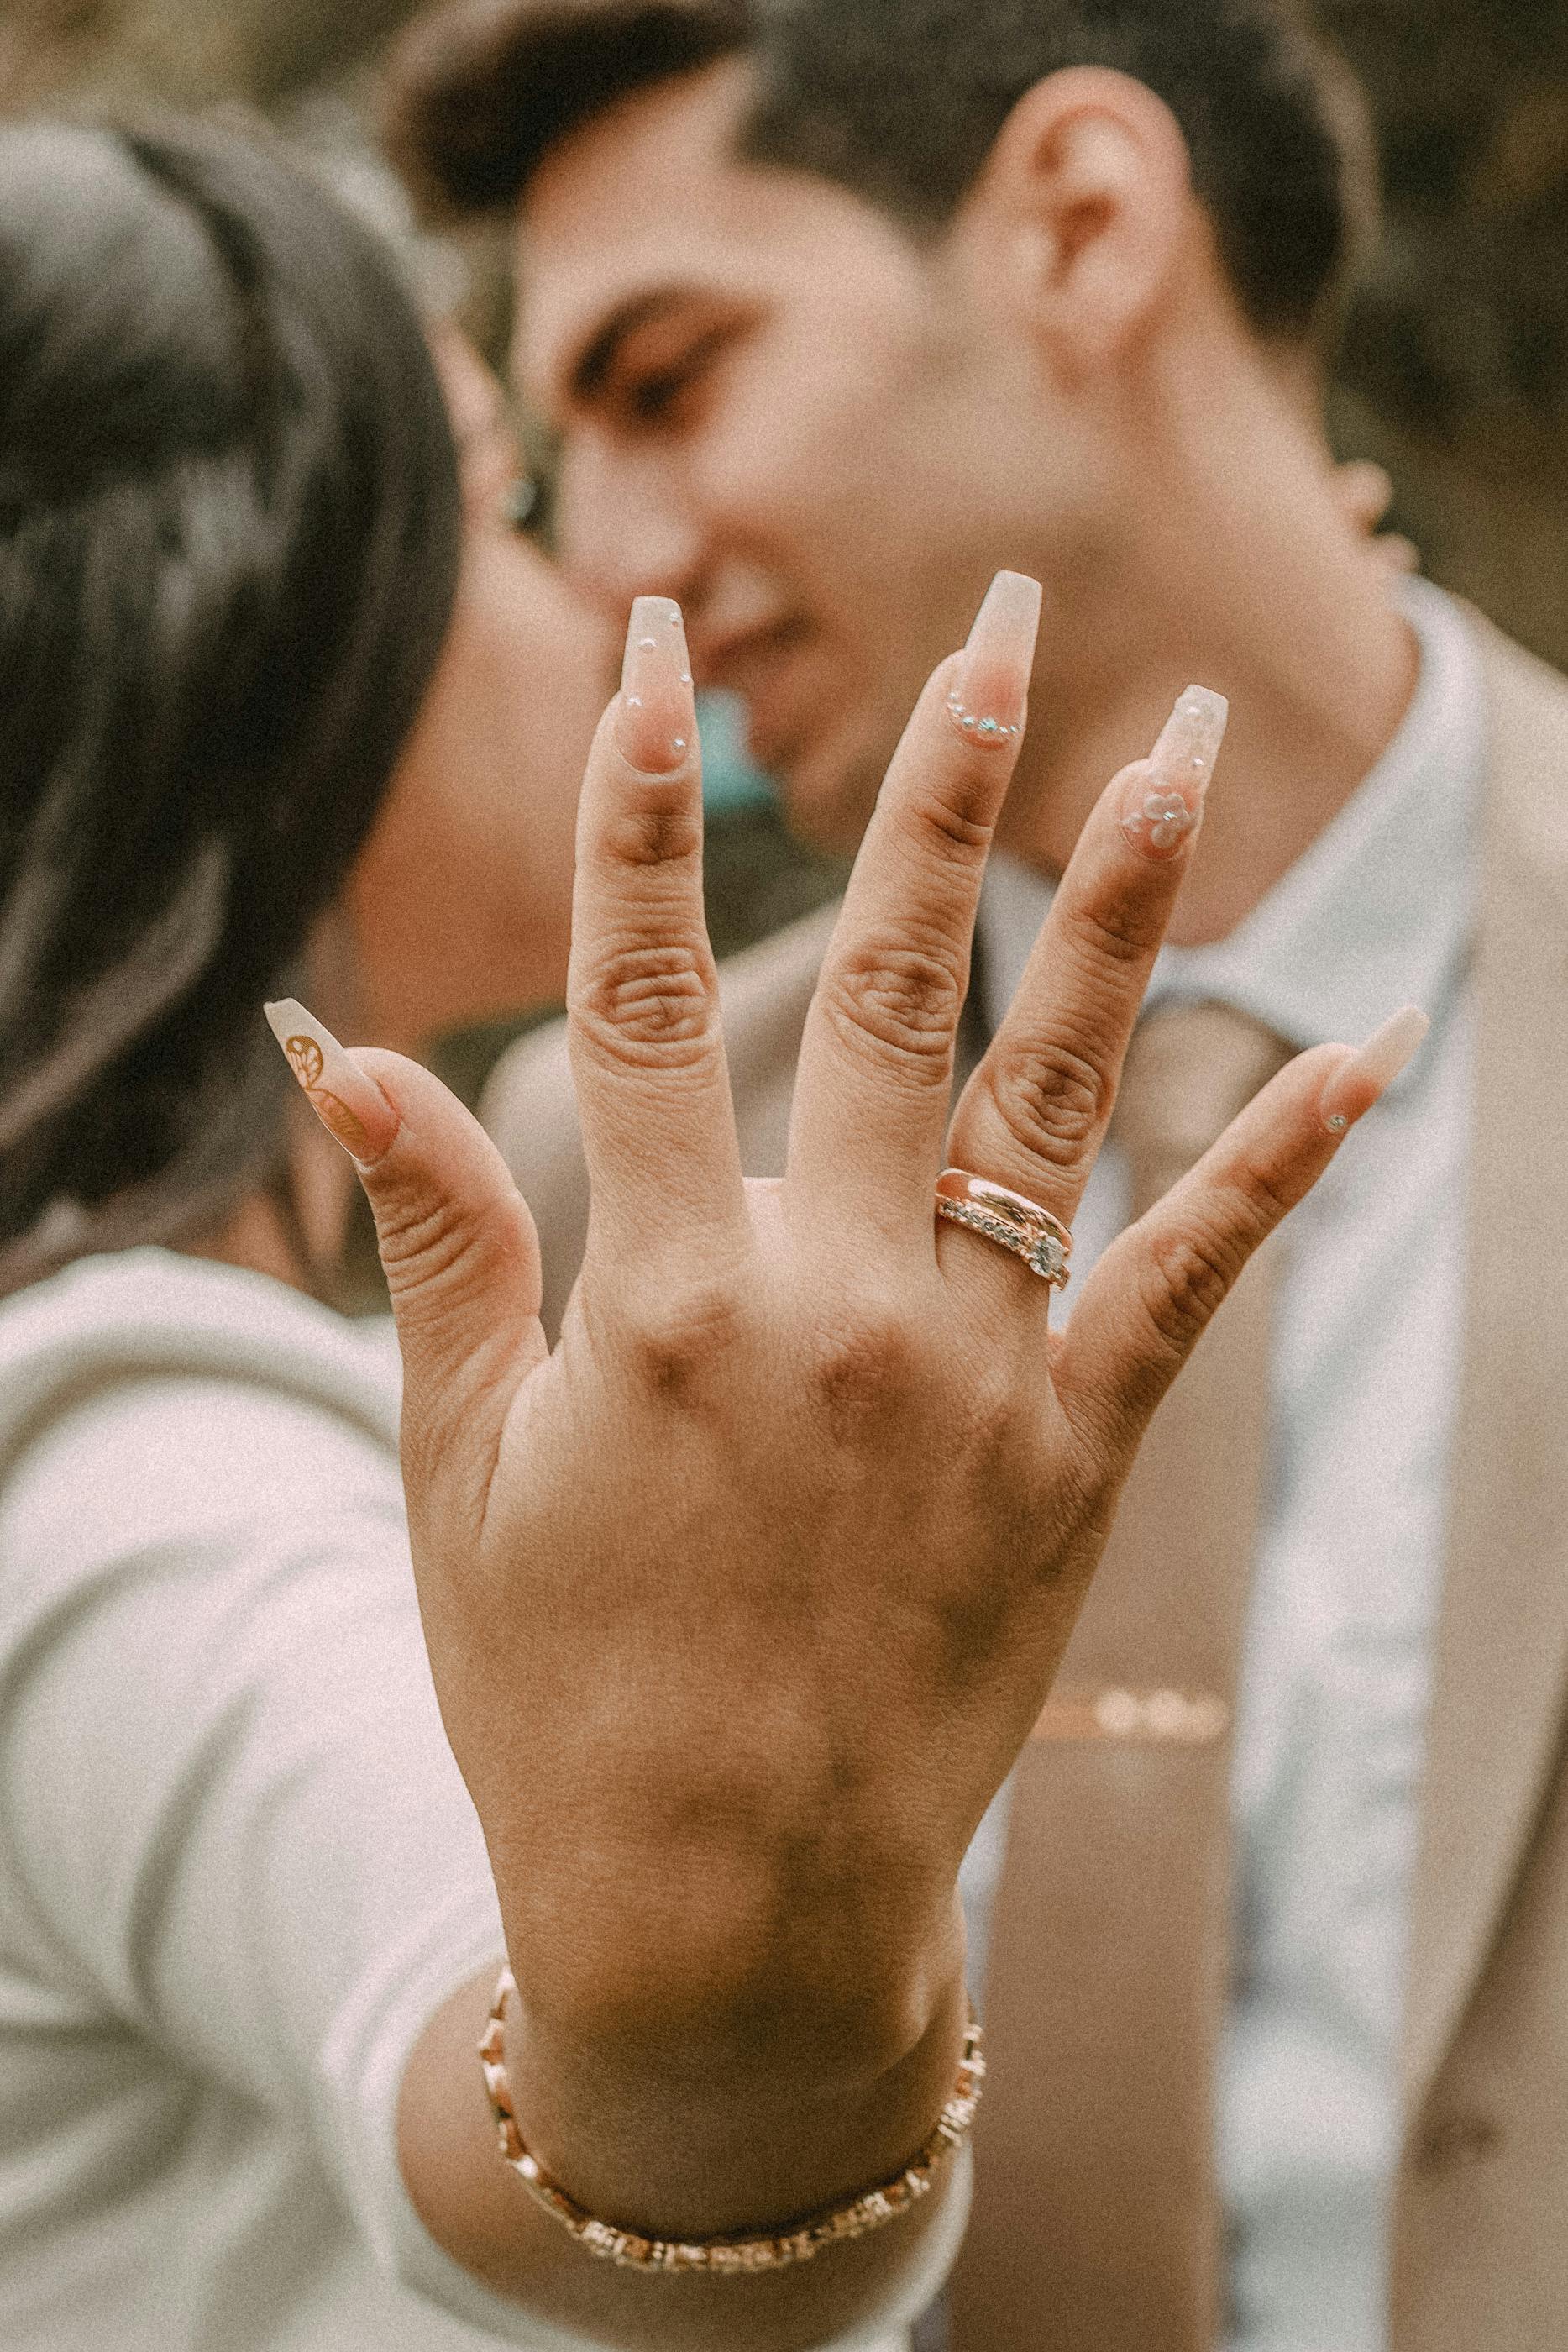 10 tips on nailing the perfect engagement ring selfie - Her World Singapore